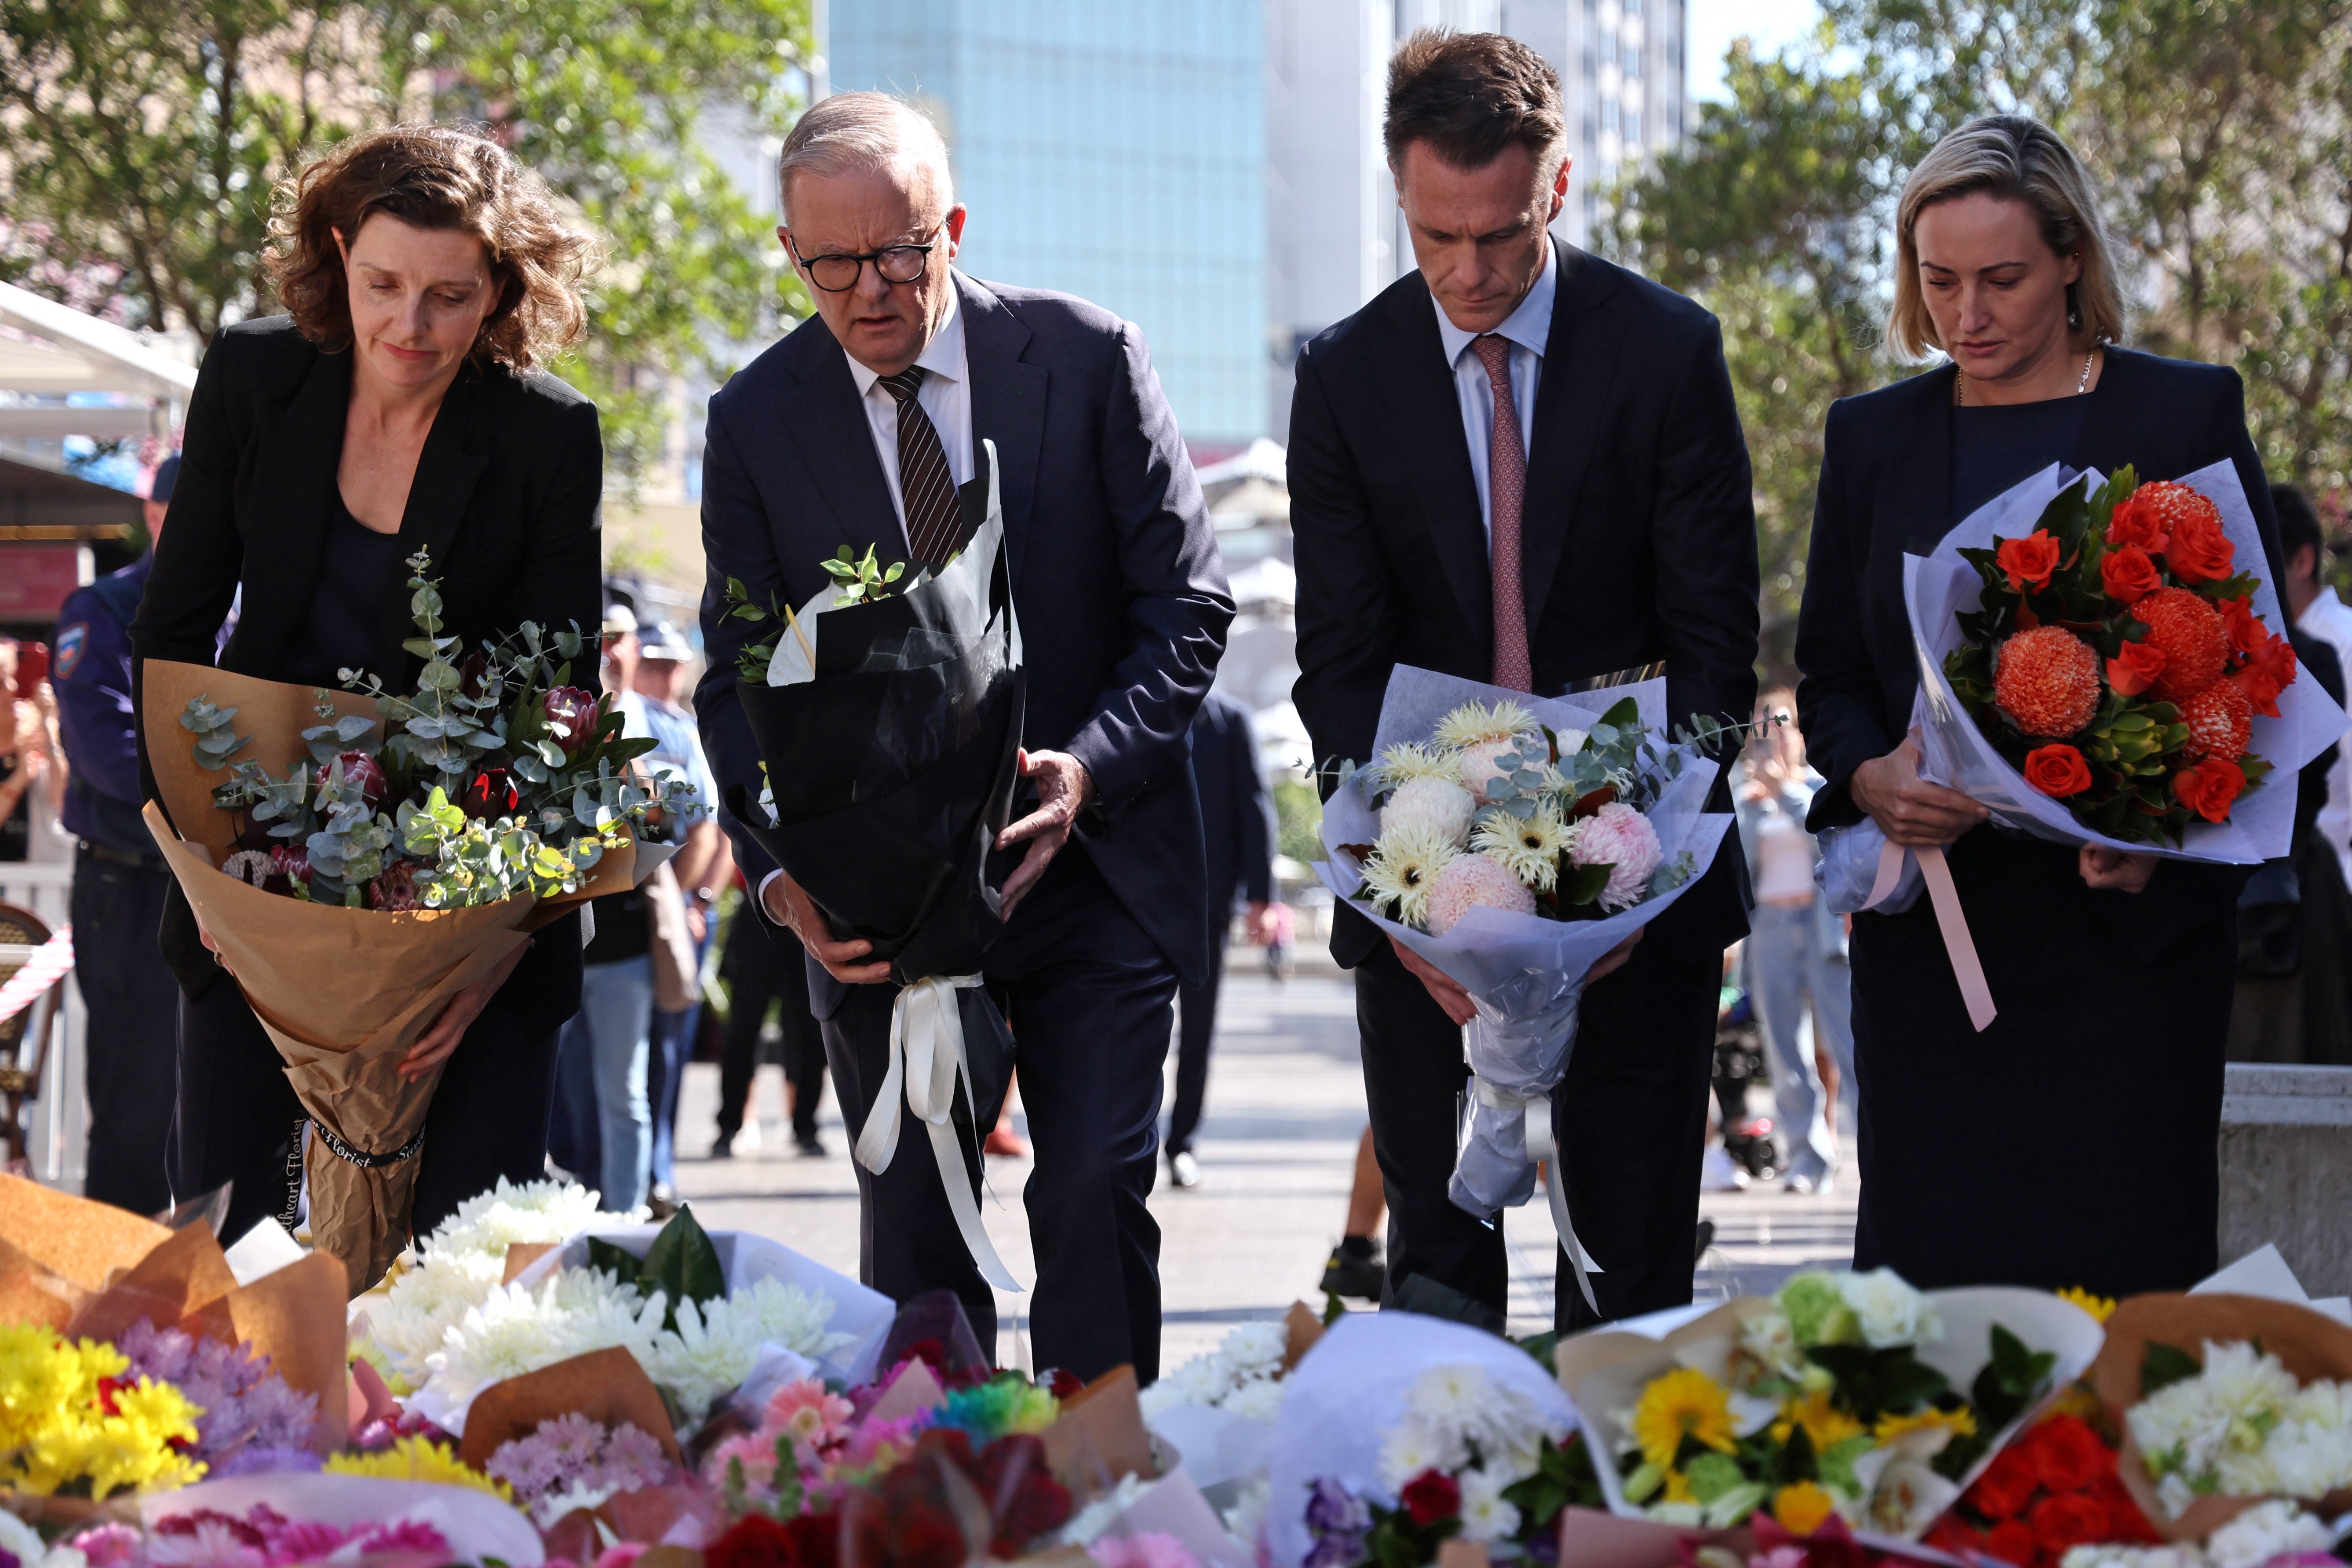 Prime minister Anthony Albanese said there was no place in Australia for violent extremism